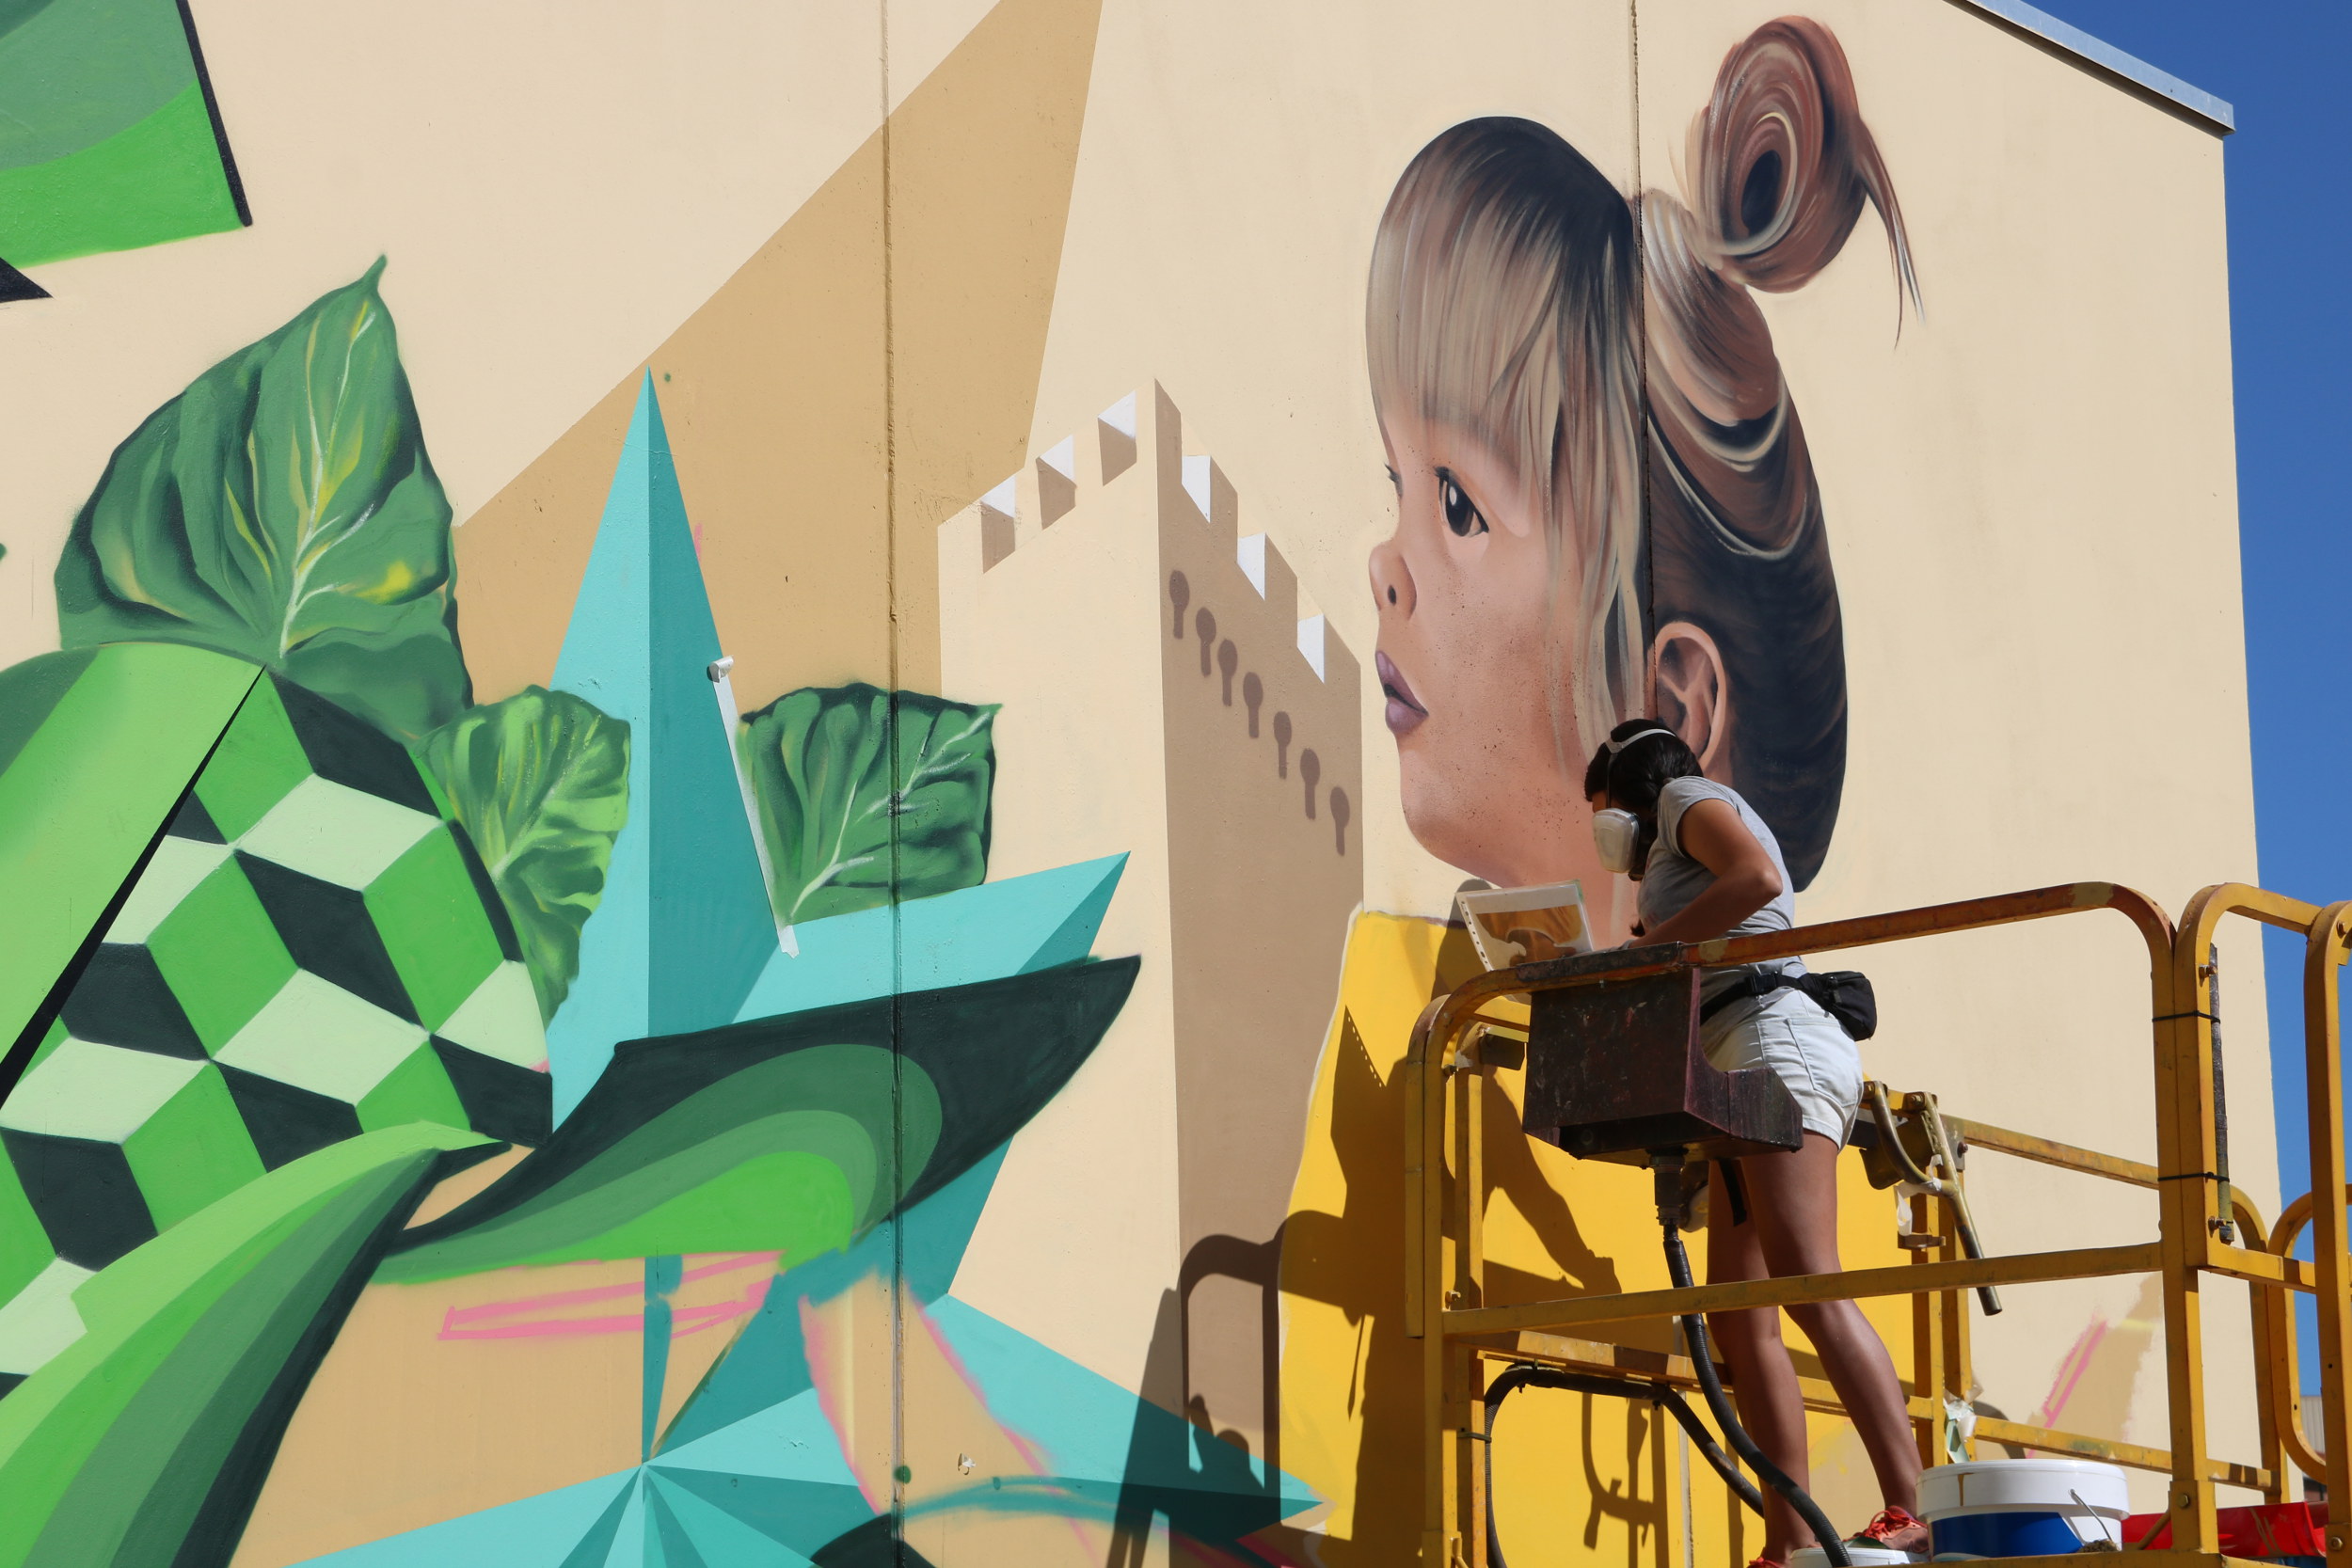 The Colombian artist Zurik painting her mural in the smalle town of Torrefarrera (by ACN)